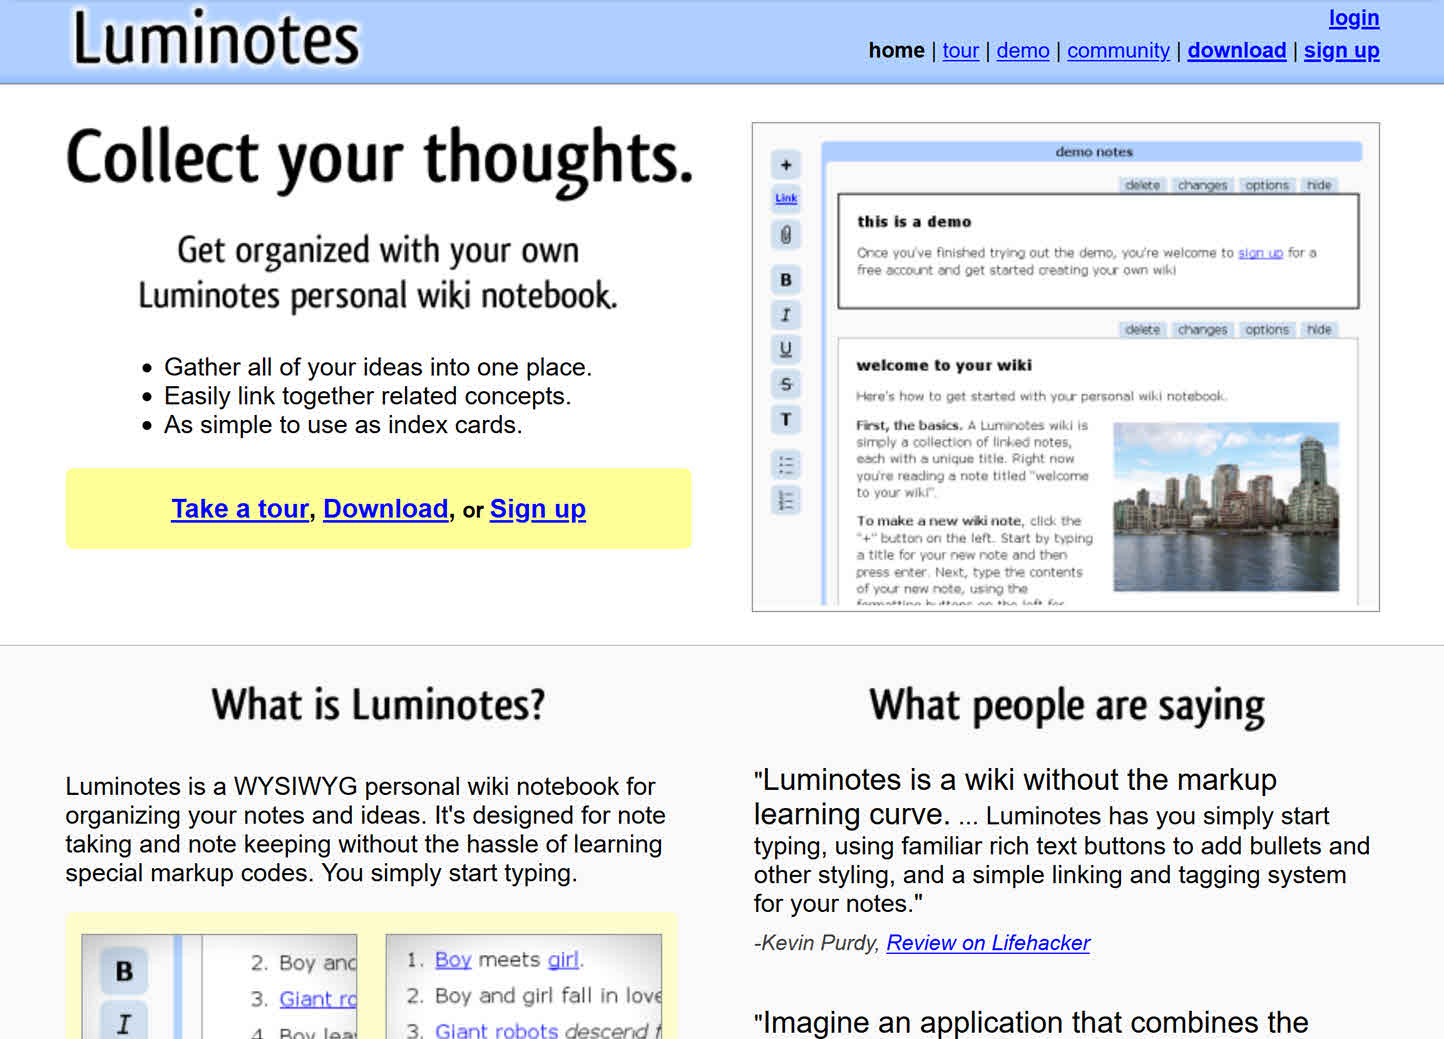 The home page of the Luminotes web service, 2007